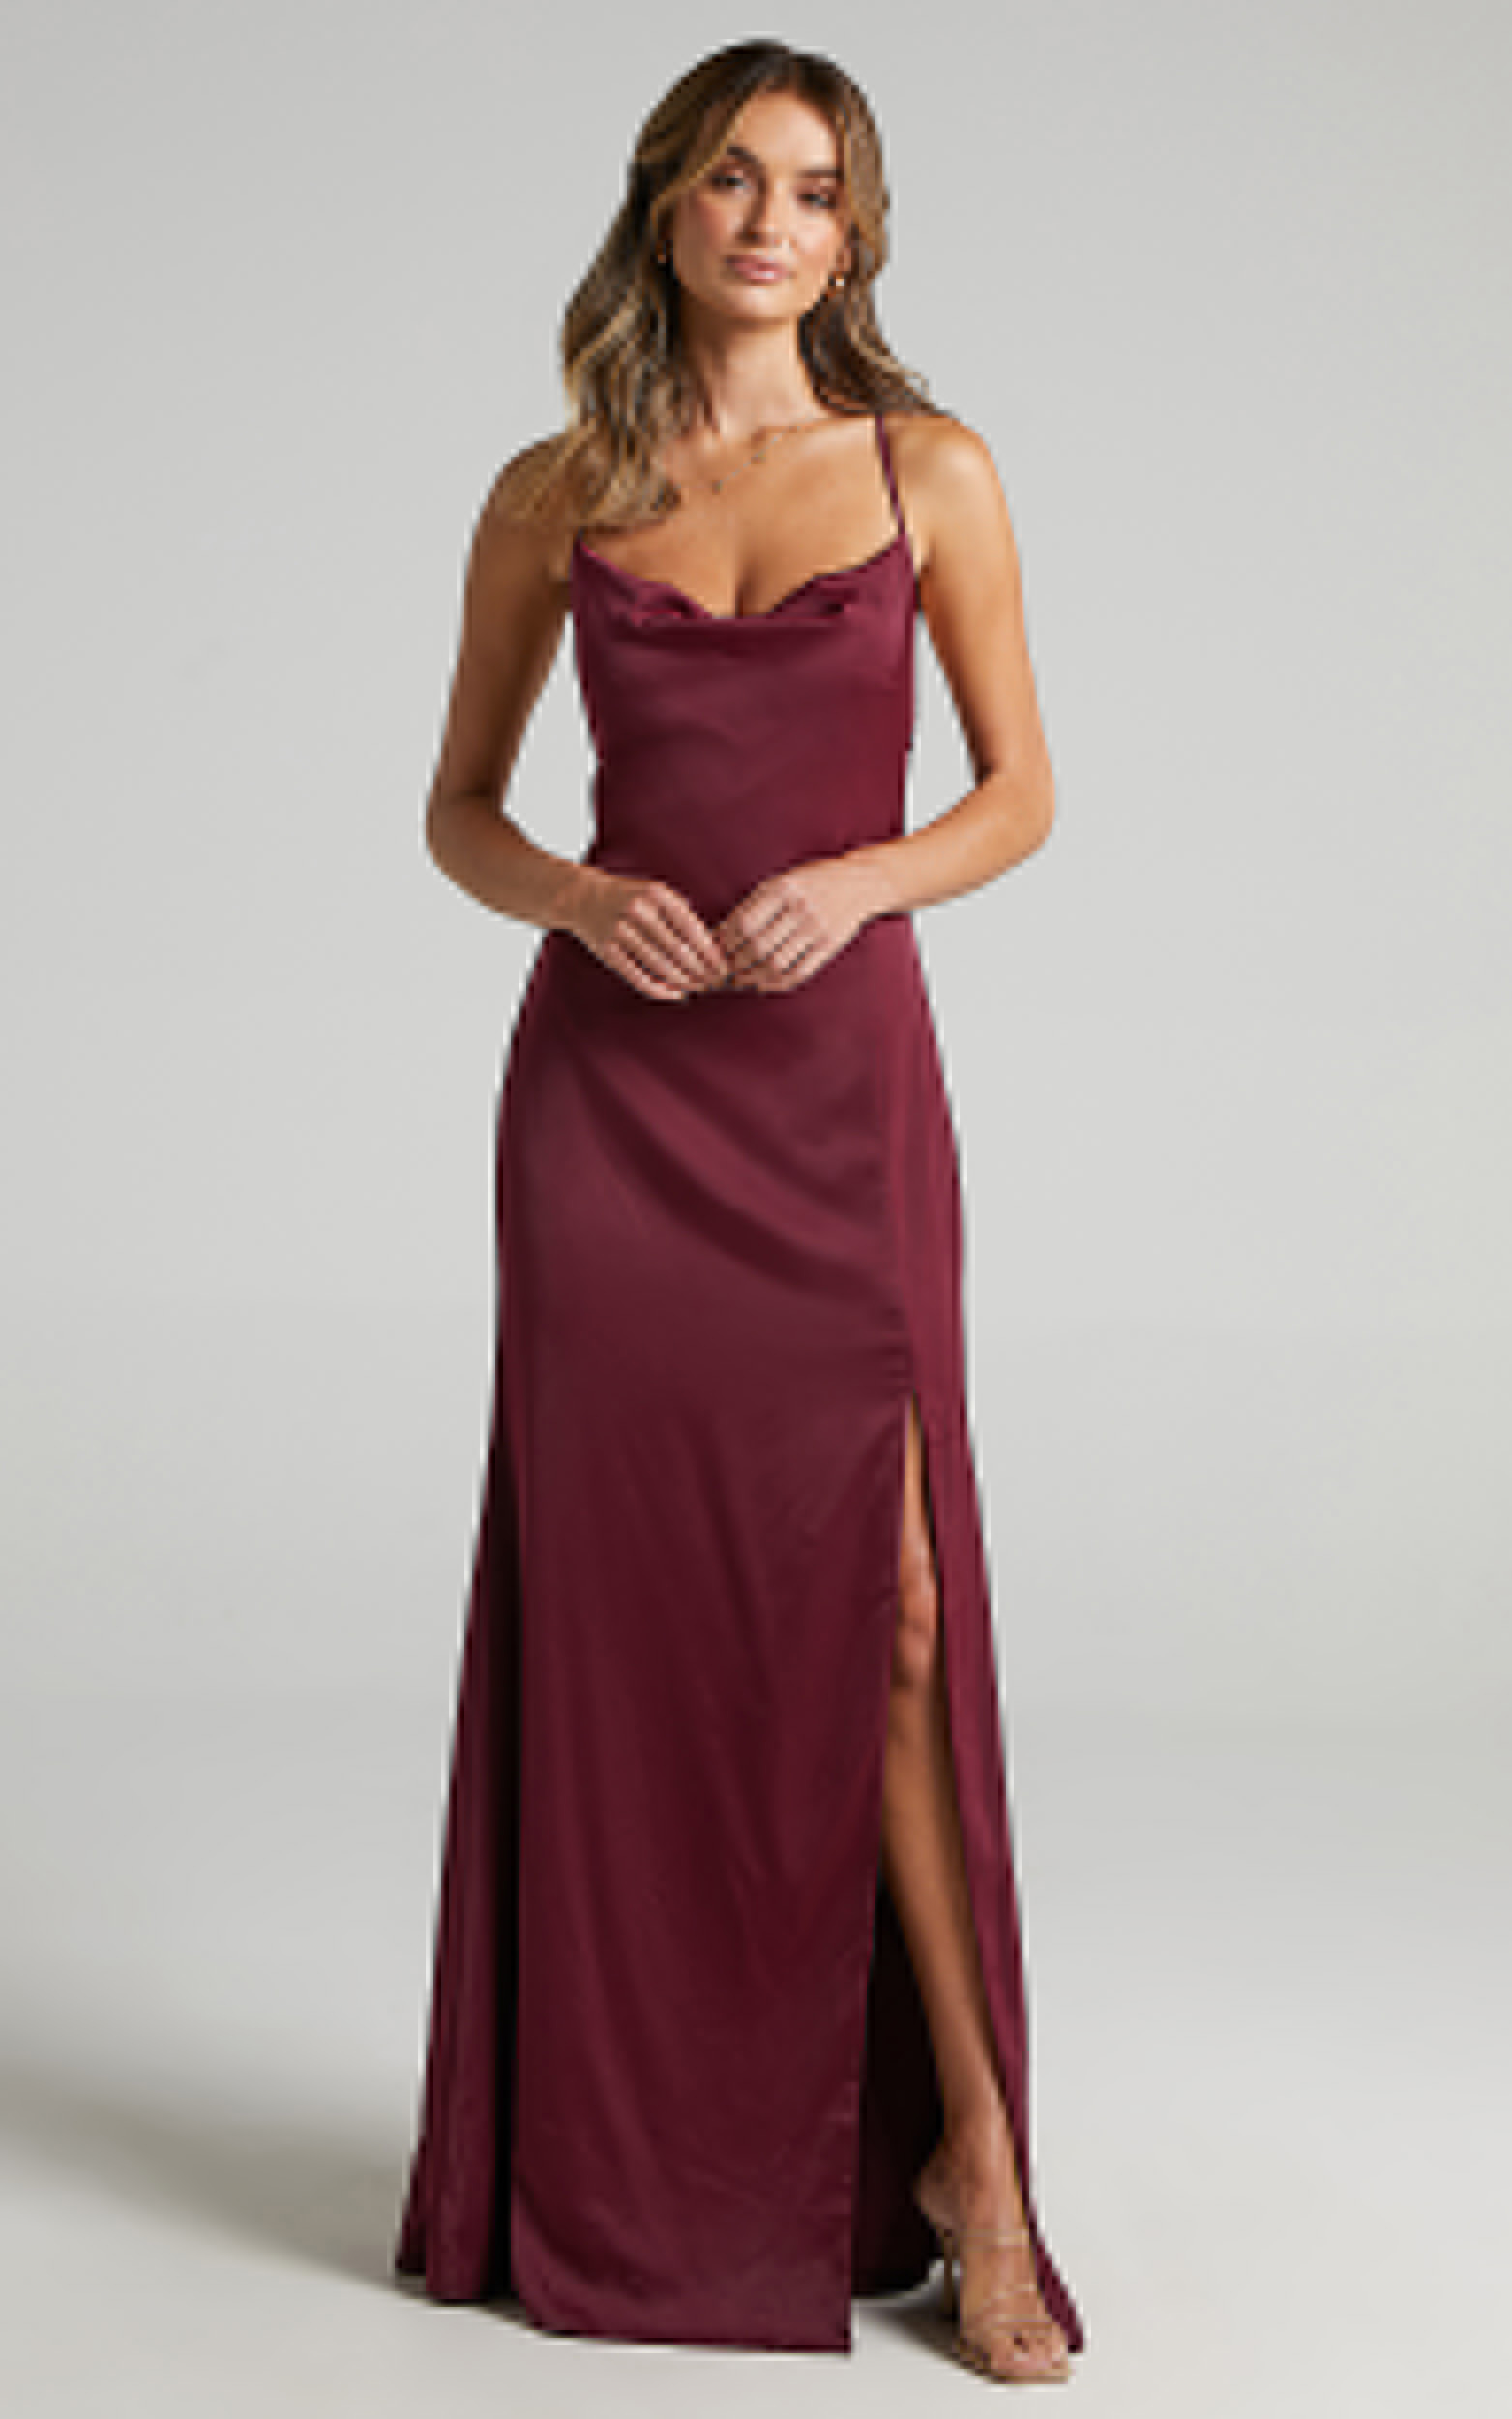 A Final Toast Dress in Mulberry Satin - 06, PRP6, hi-res image number null